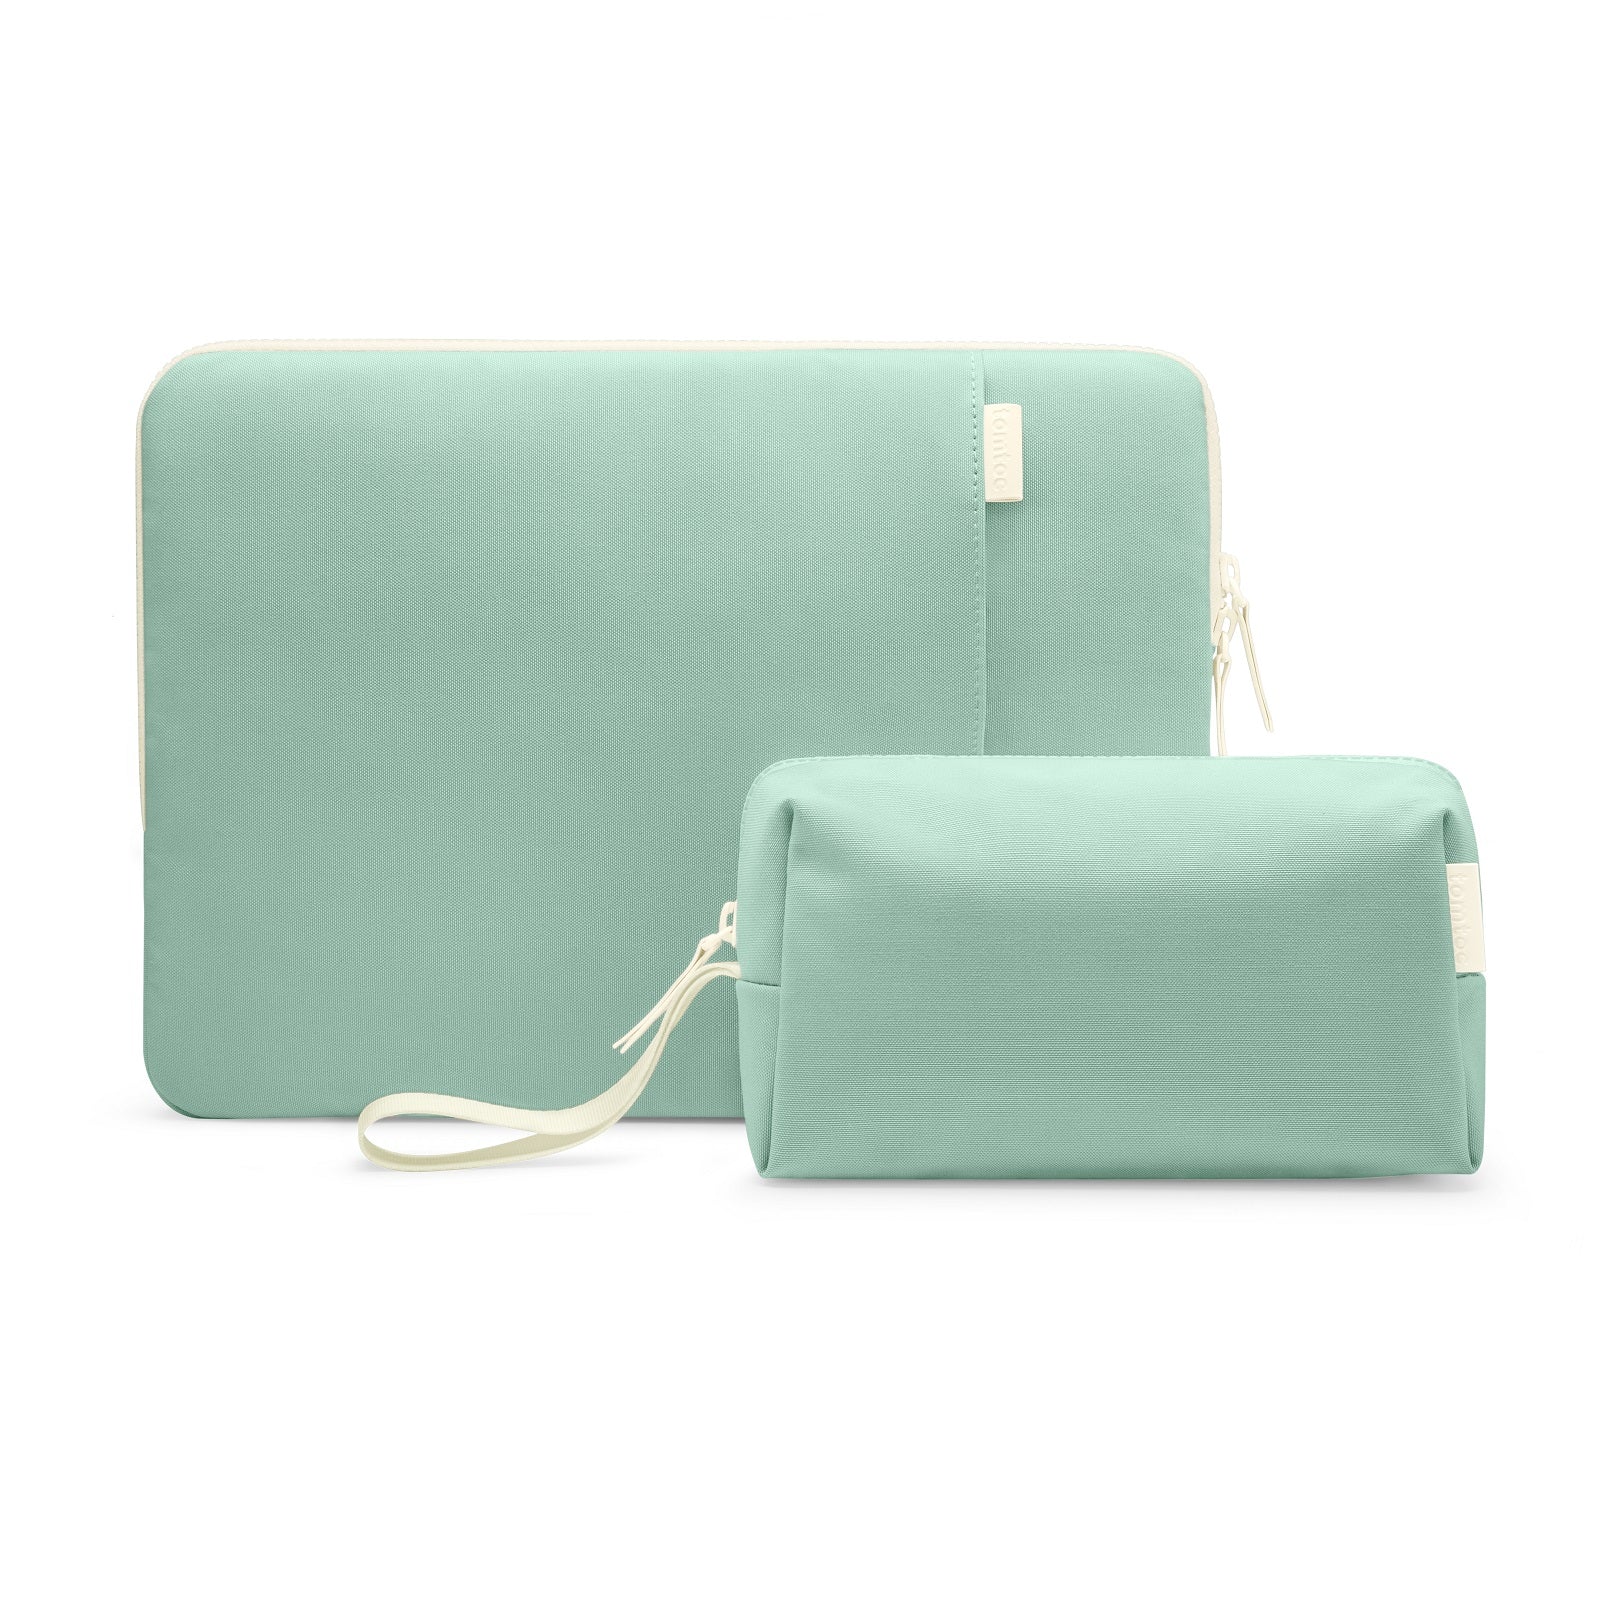 Defender-A23 Jelly Laptop Sleeve Kit for 14-inch MacBook Pro M1 Pro/Max A2442 2021 | Green